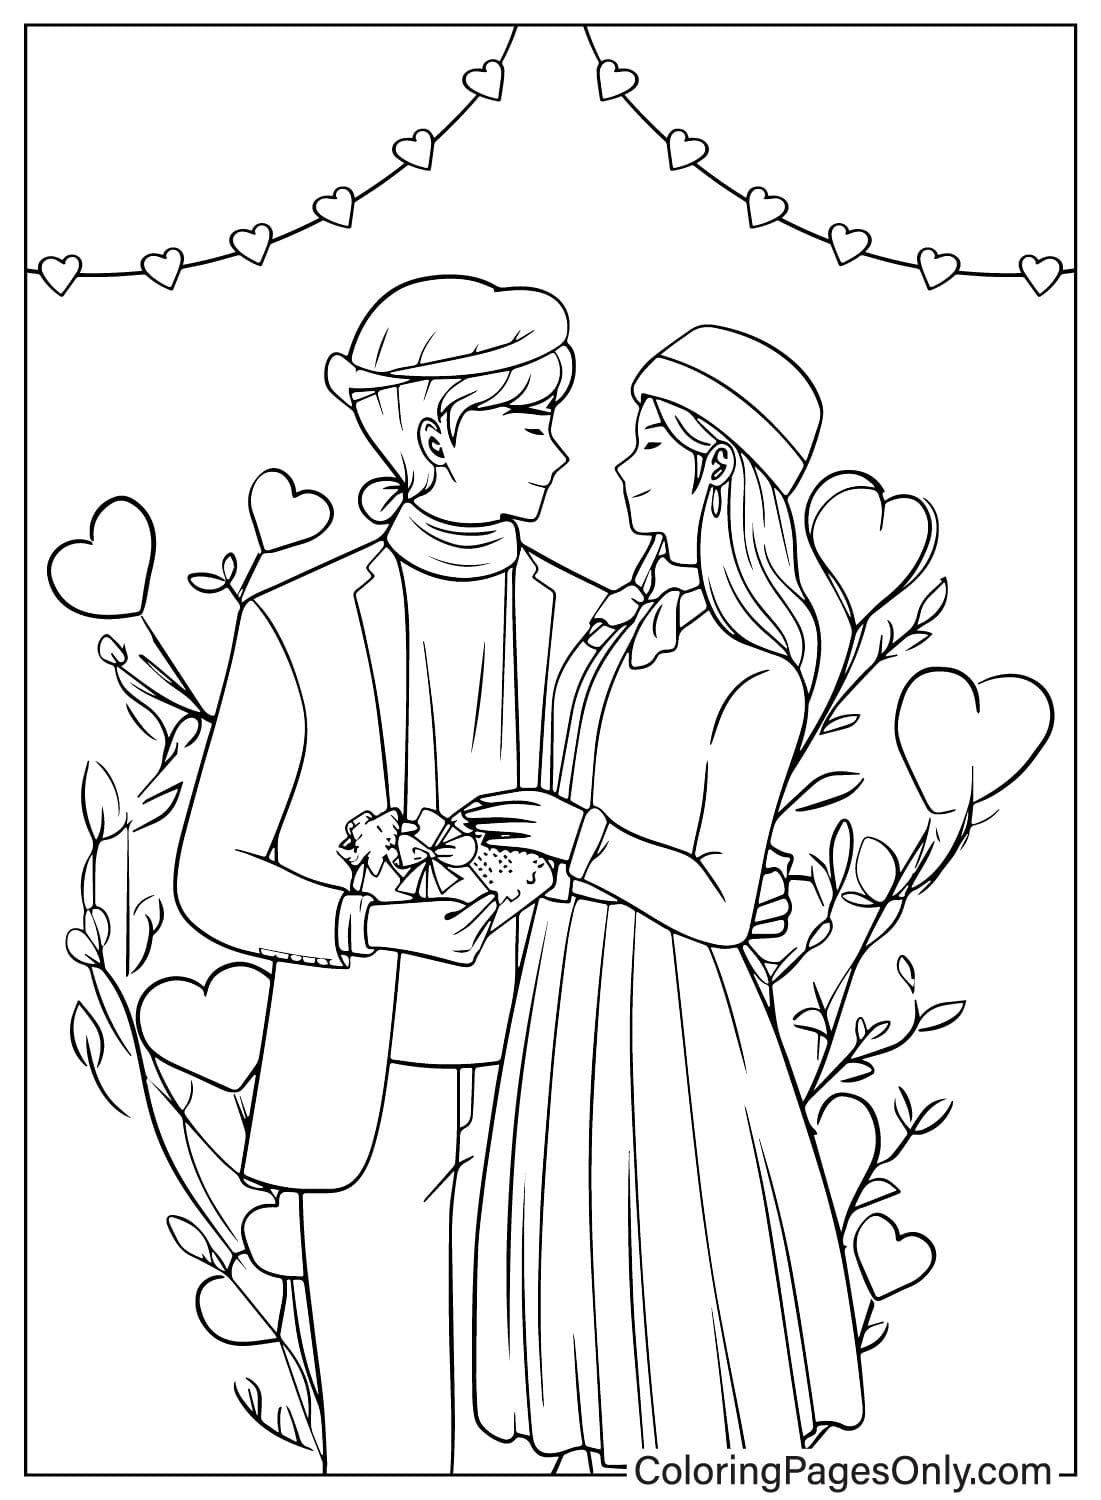 Valentines Day Coloring Page Printable from Valentine's Day